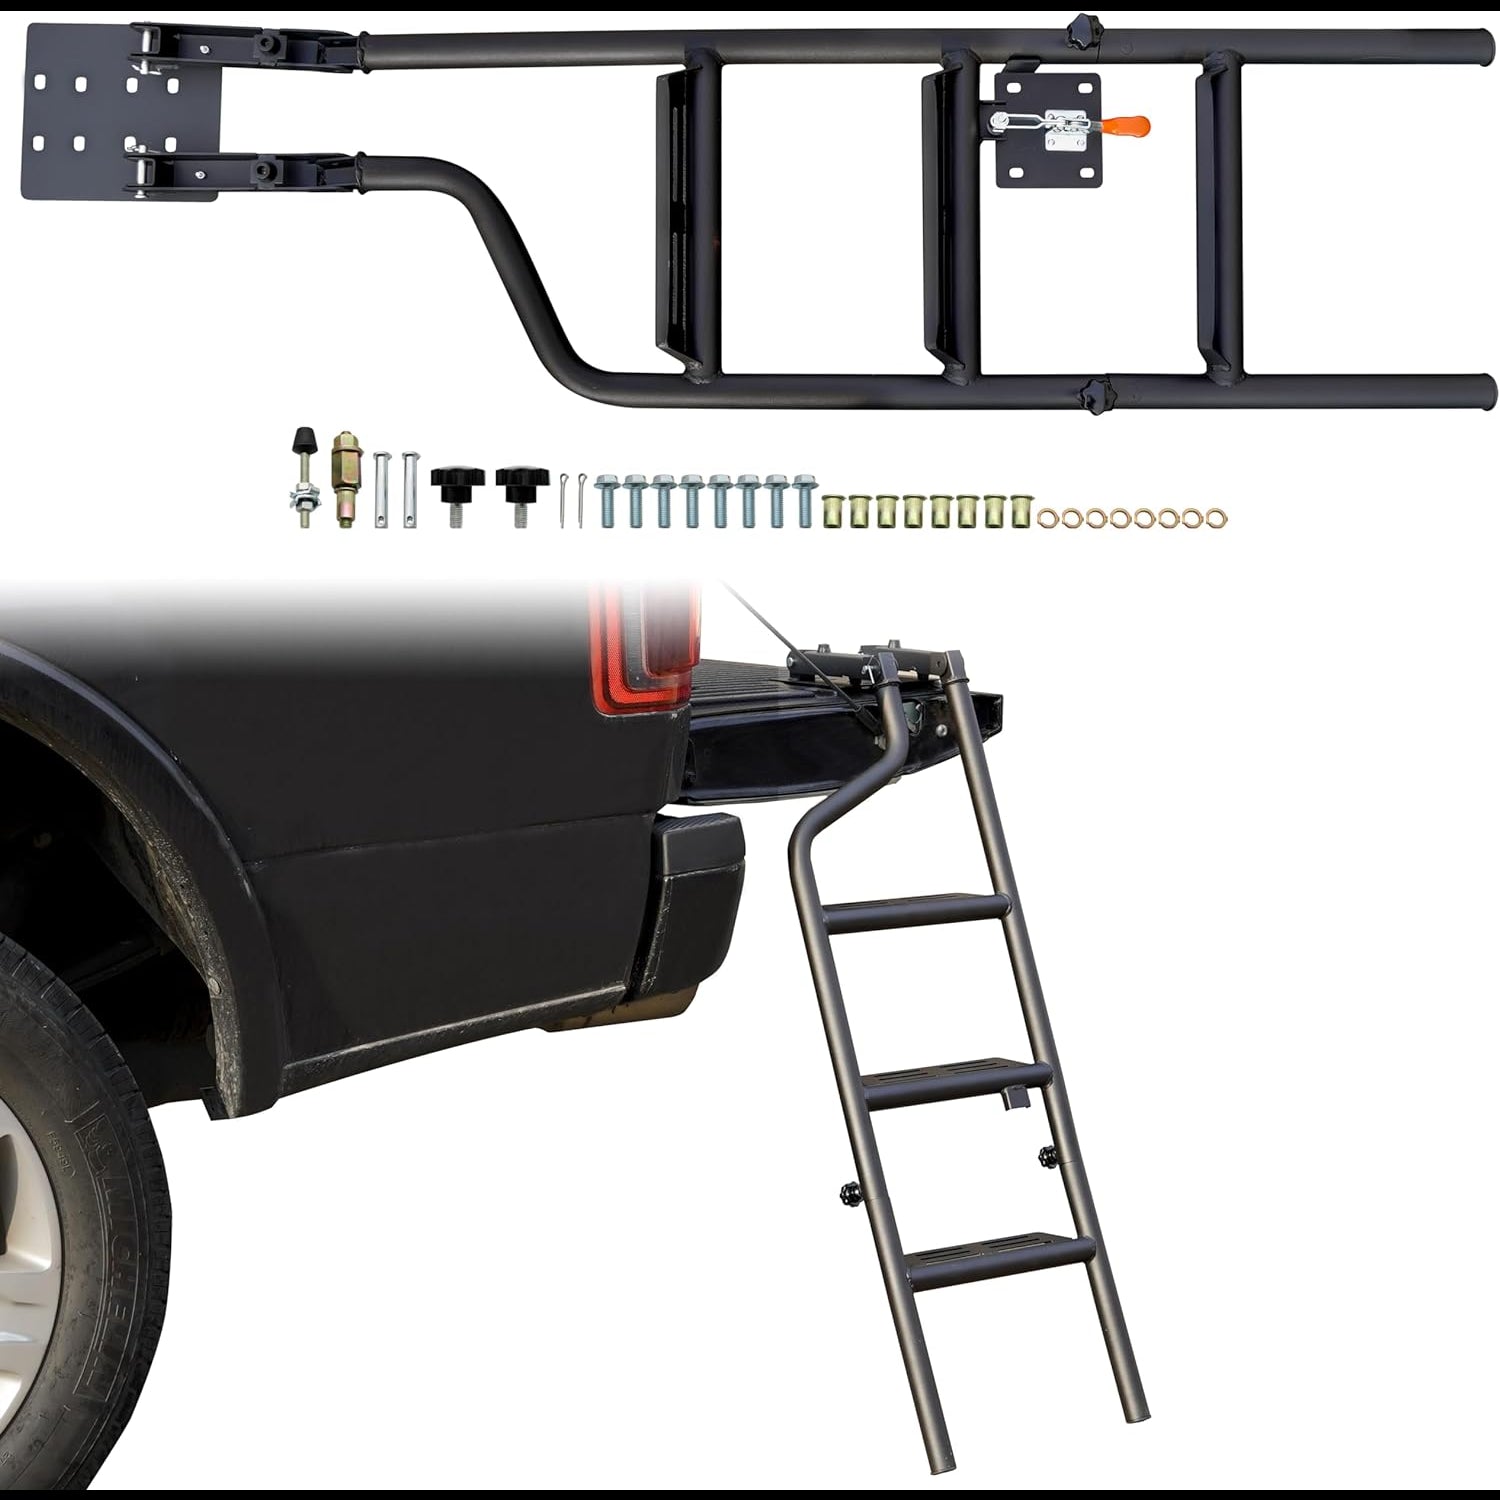 Universal 42" Foldable Pickup Truck Tailgate Ladder, Heavy Duty Folding Tailgate Step Fit for Ford F150